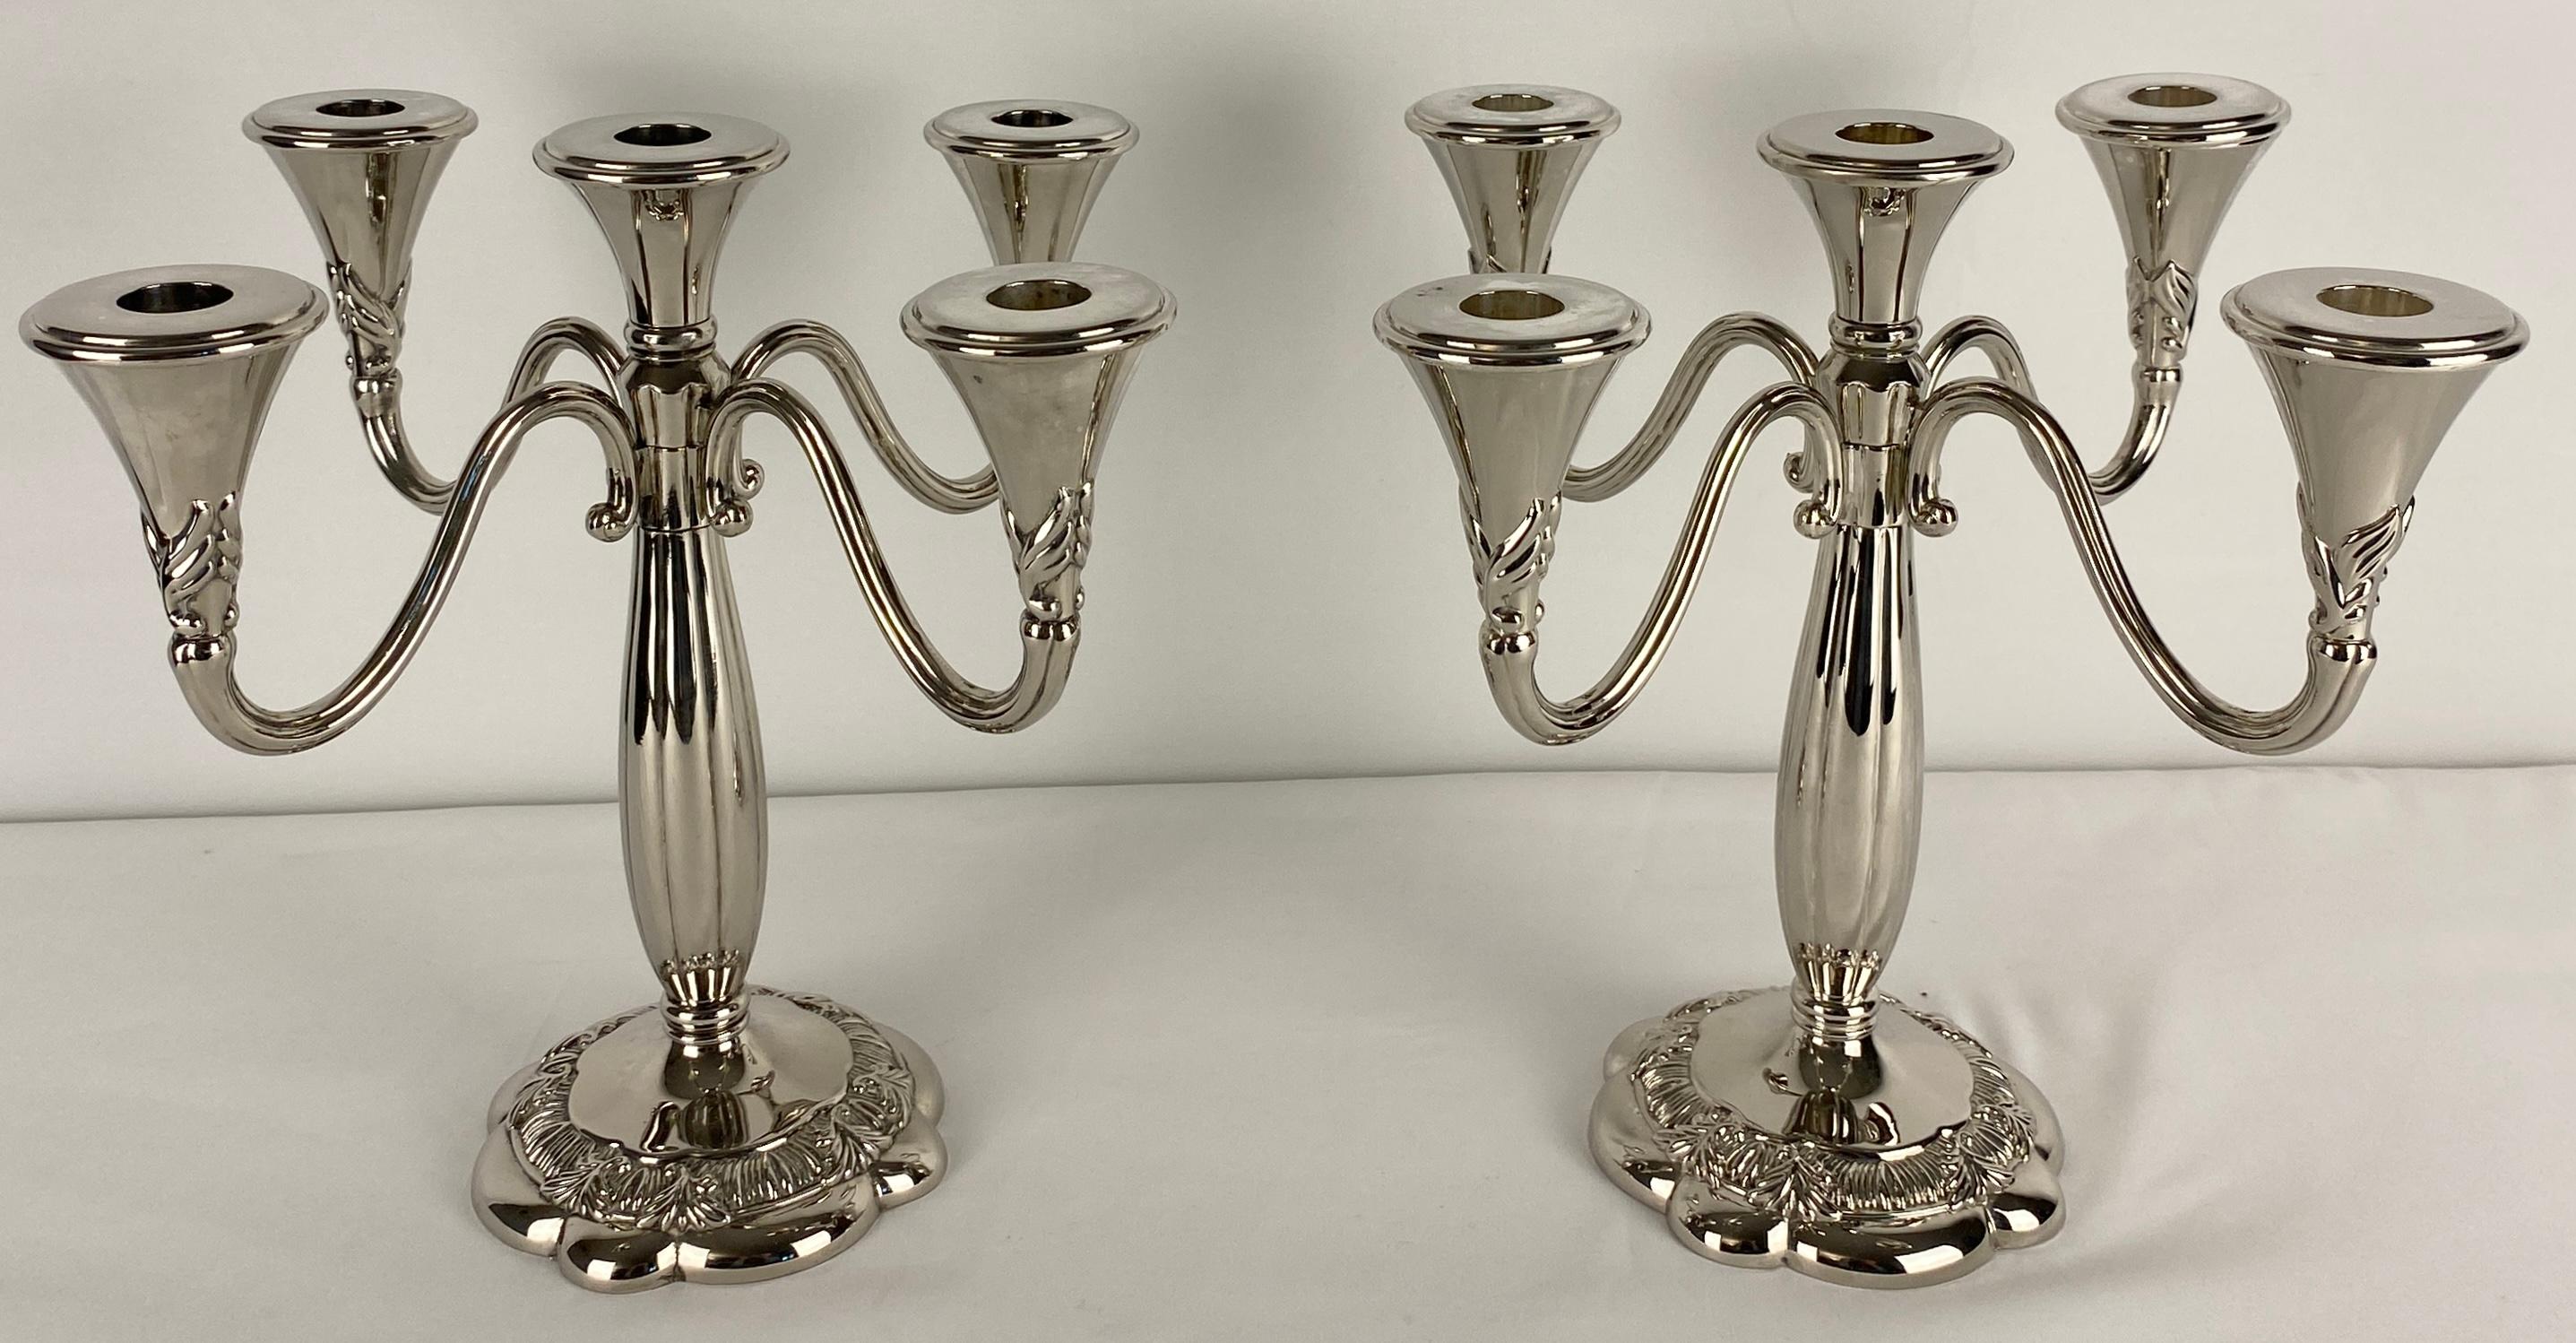 Pair of Art Deco Style Silver Plated Candelabras by Royal Gallery For Sale 1